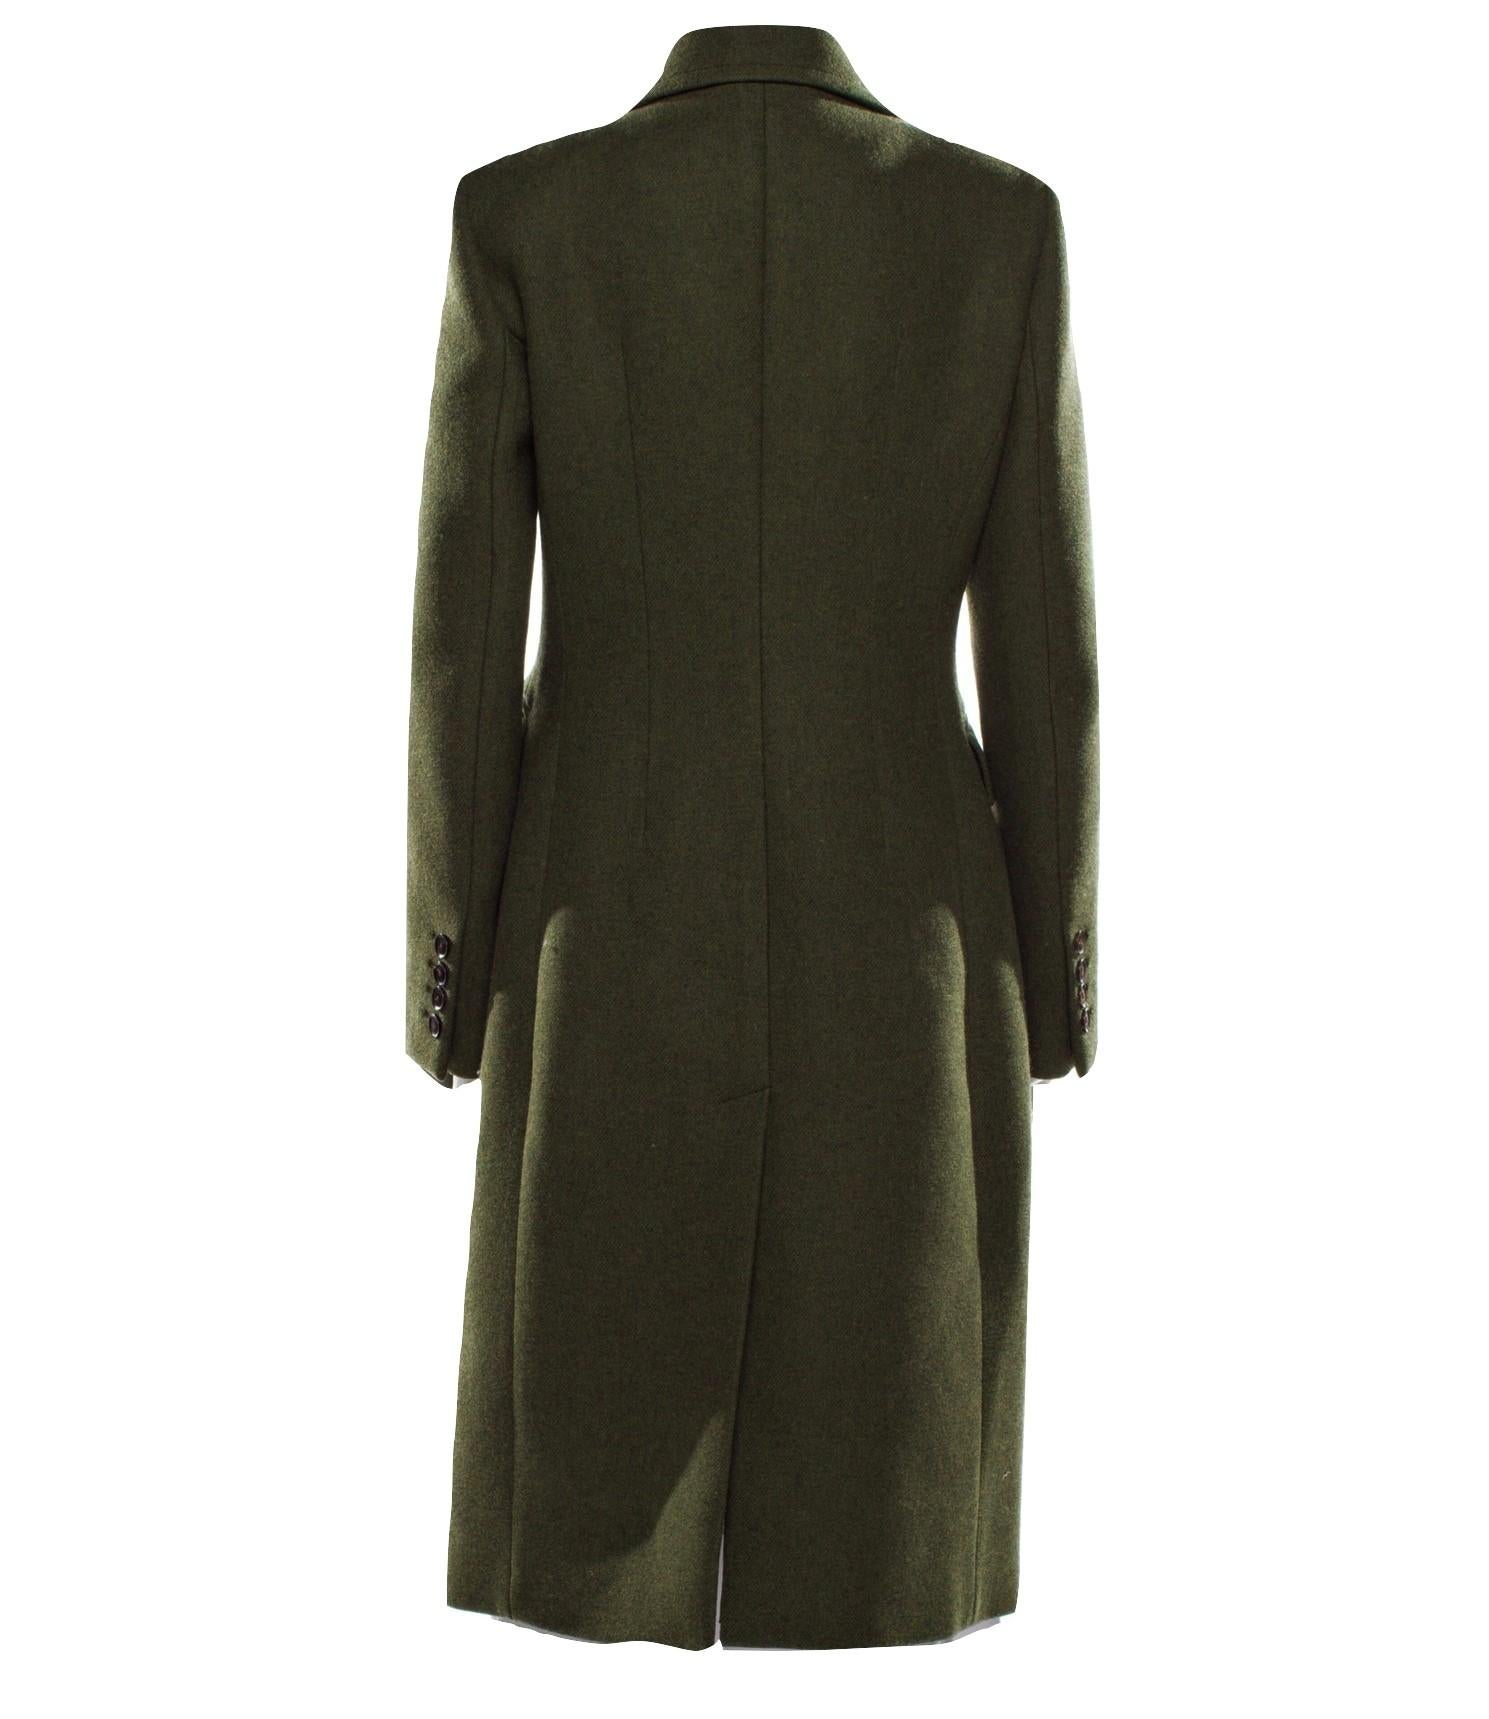 Black New Gucci $3215 Kate Upton Olive Green Wool Coat Jacket Fall 2013 With Tags